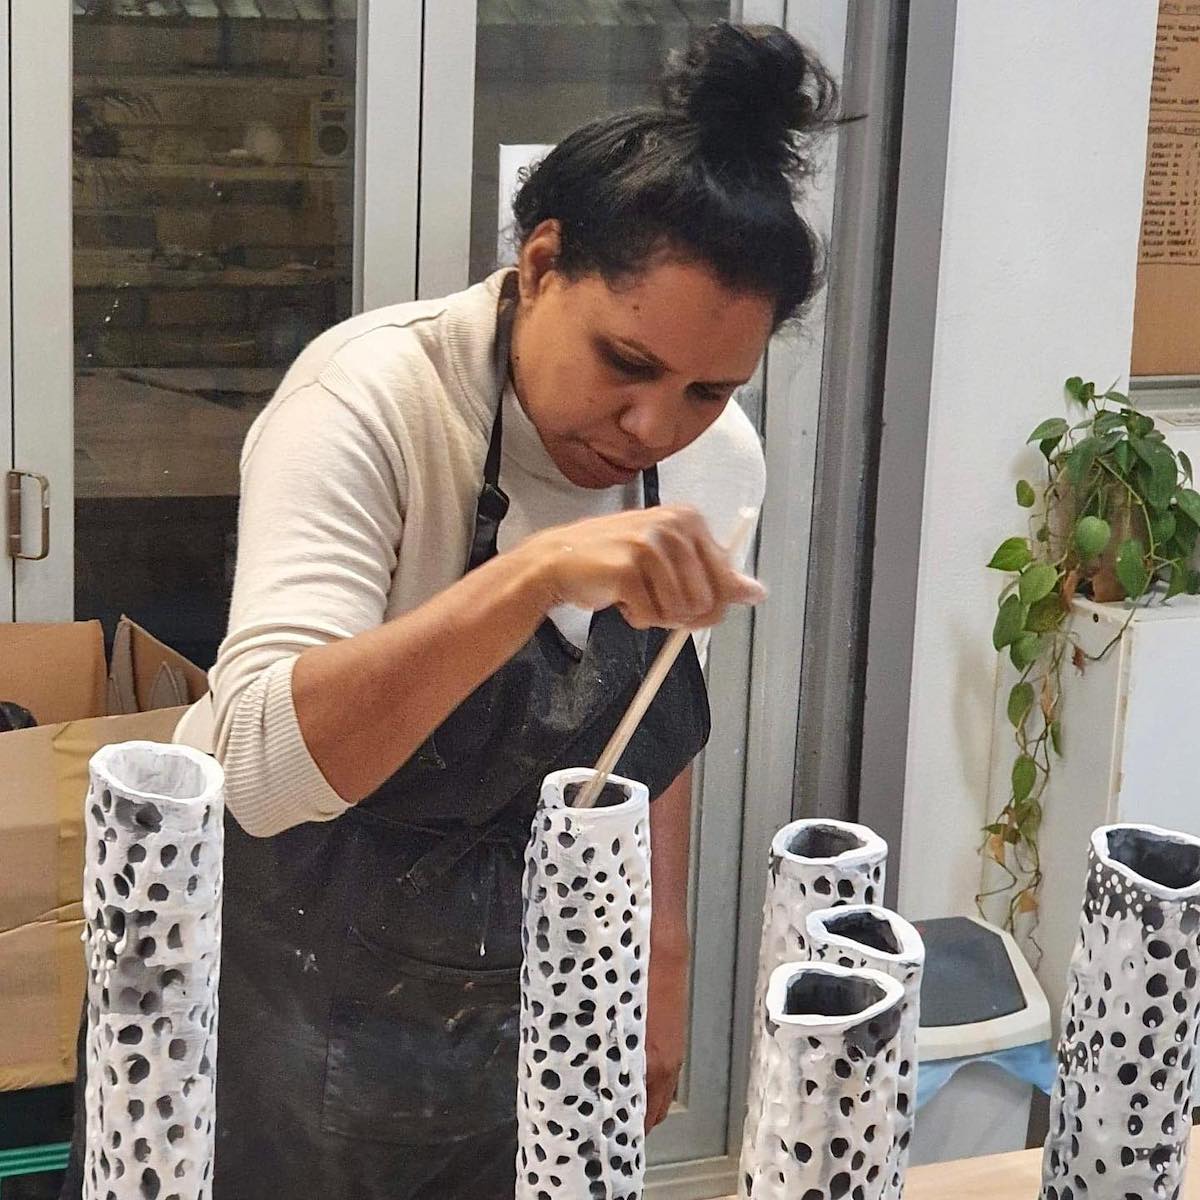 Image of a person wearing an apron as they hand paint the inside of a white and black ceramic sculpture, with other painted black and white ceramic sculptures nearby.